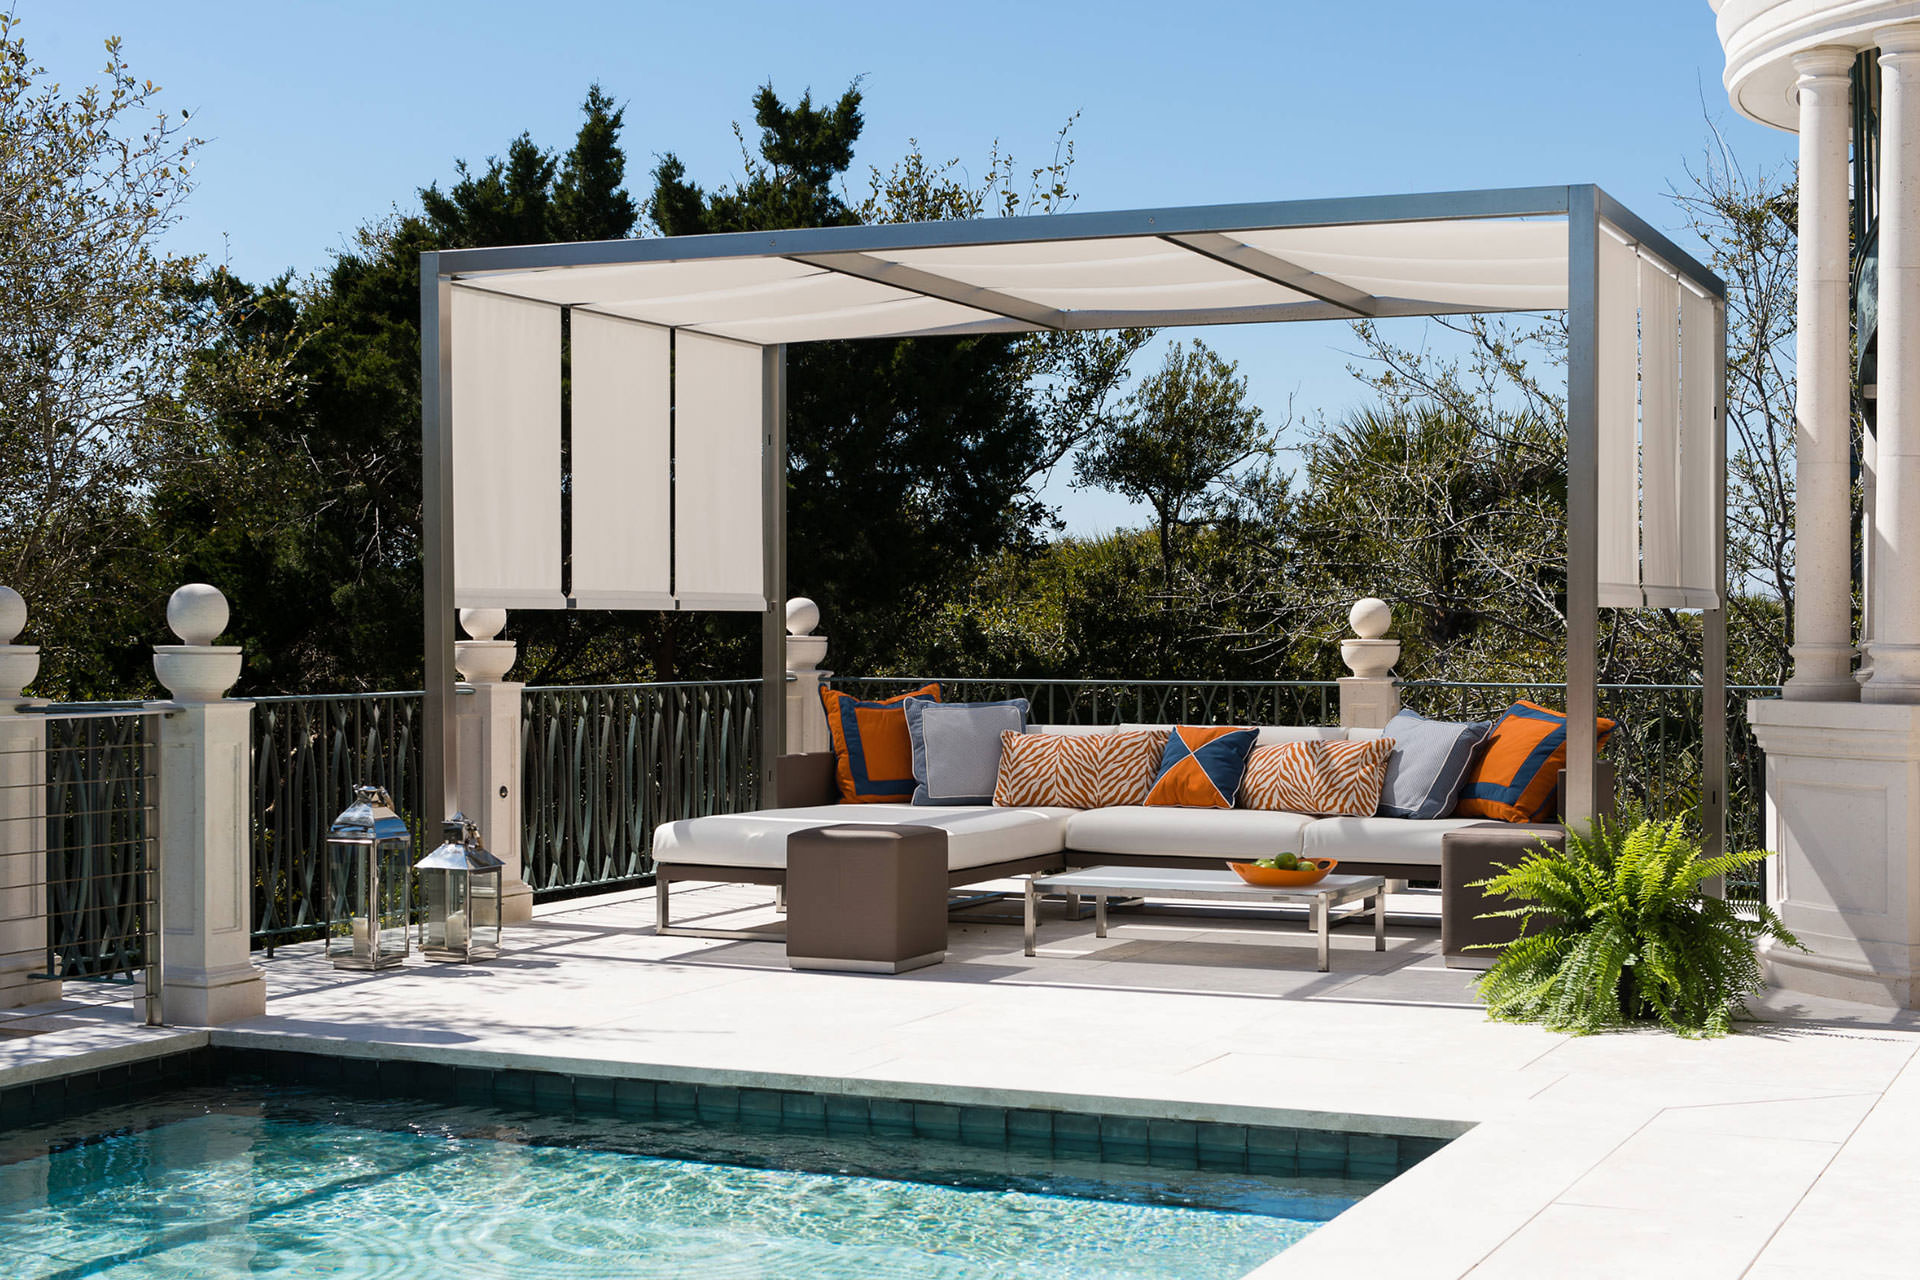 Pergola Roof Ideas: What You Need to Know | ShadeFX Canopies